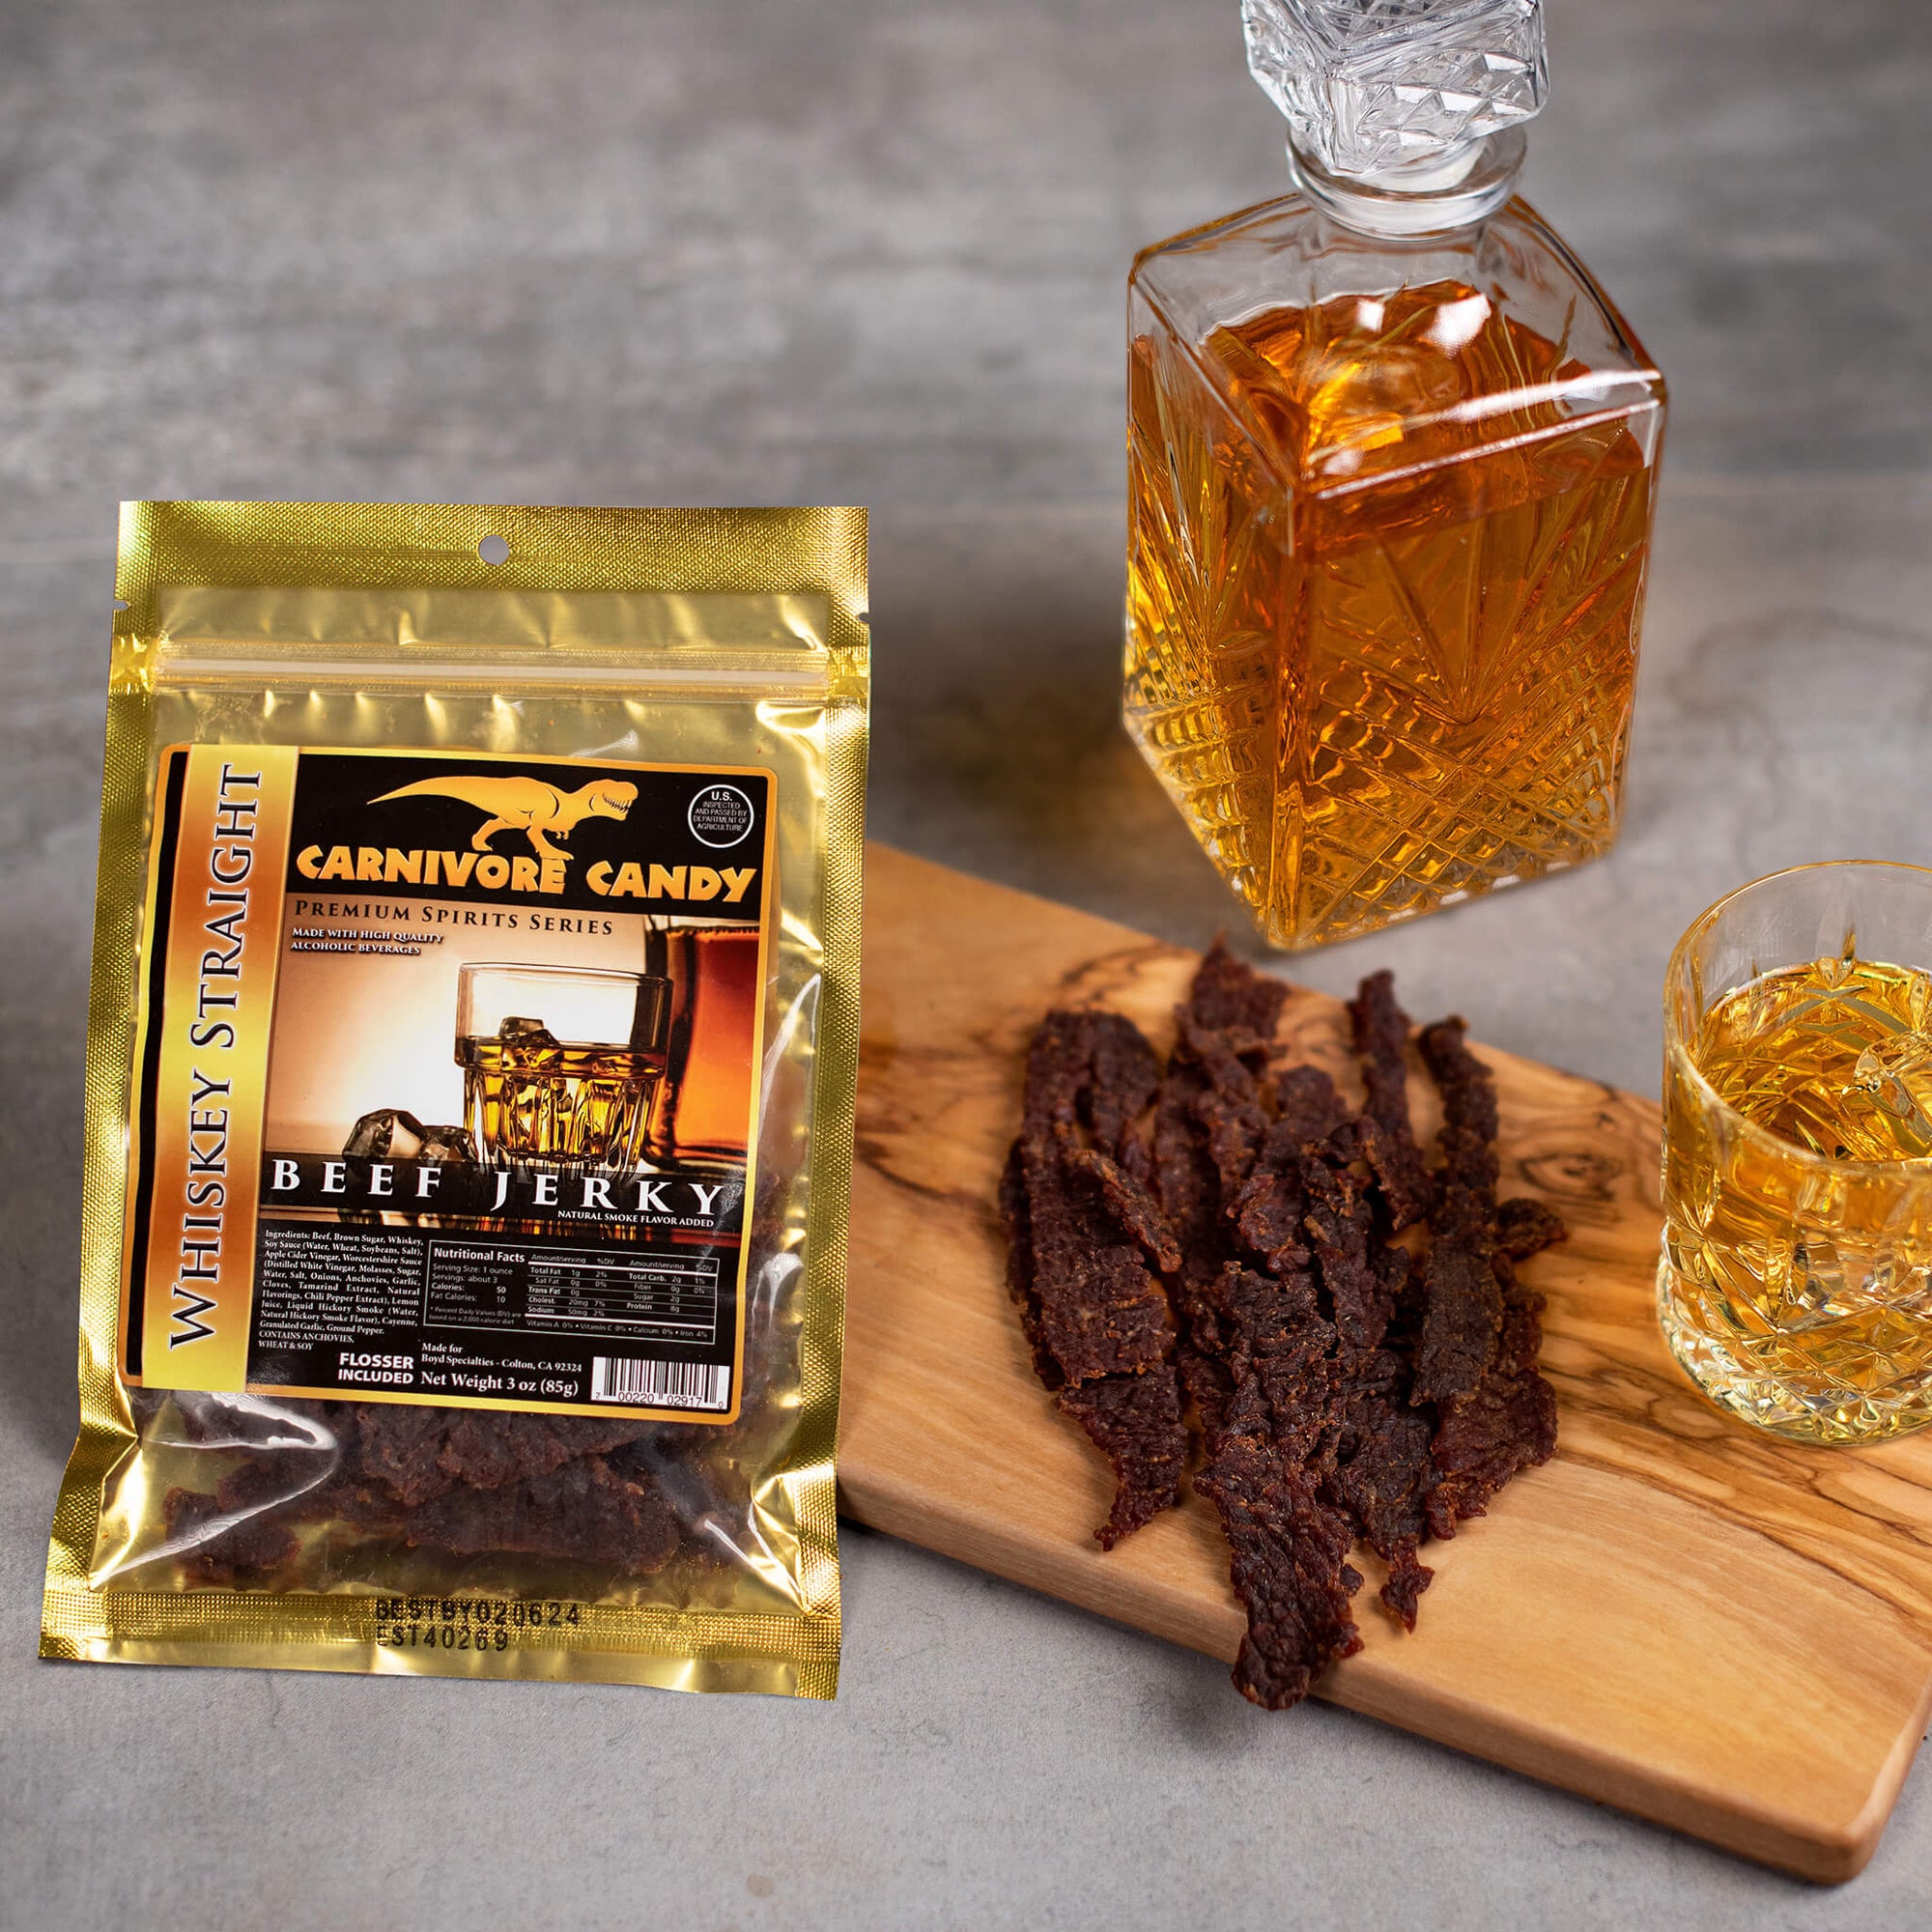 Manly Man Co. Booze Infused Jerky Tactical X-mas Stocking Kit